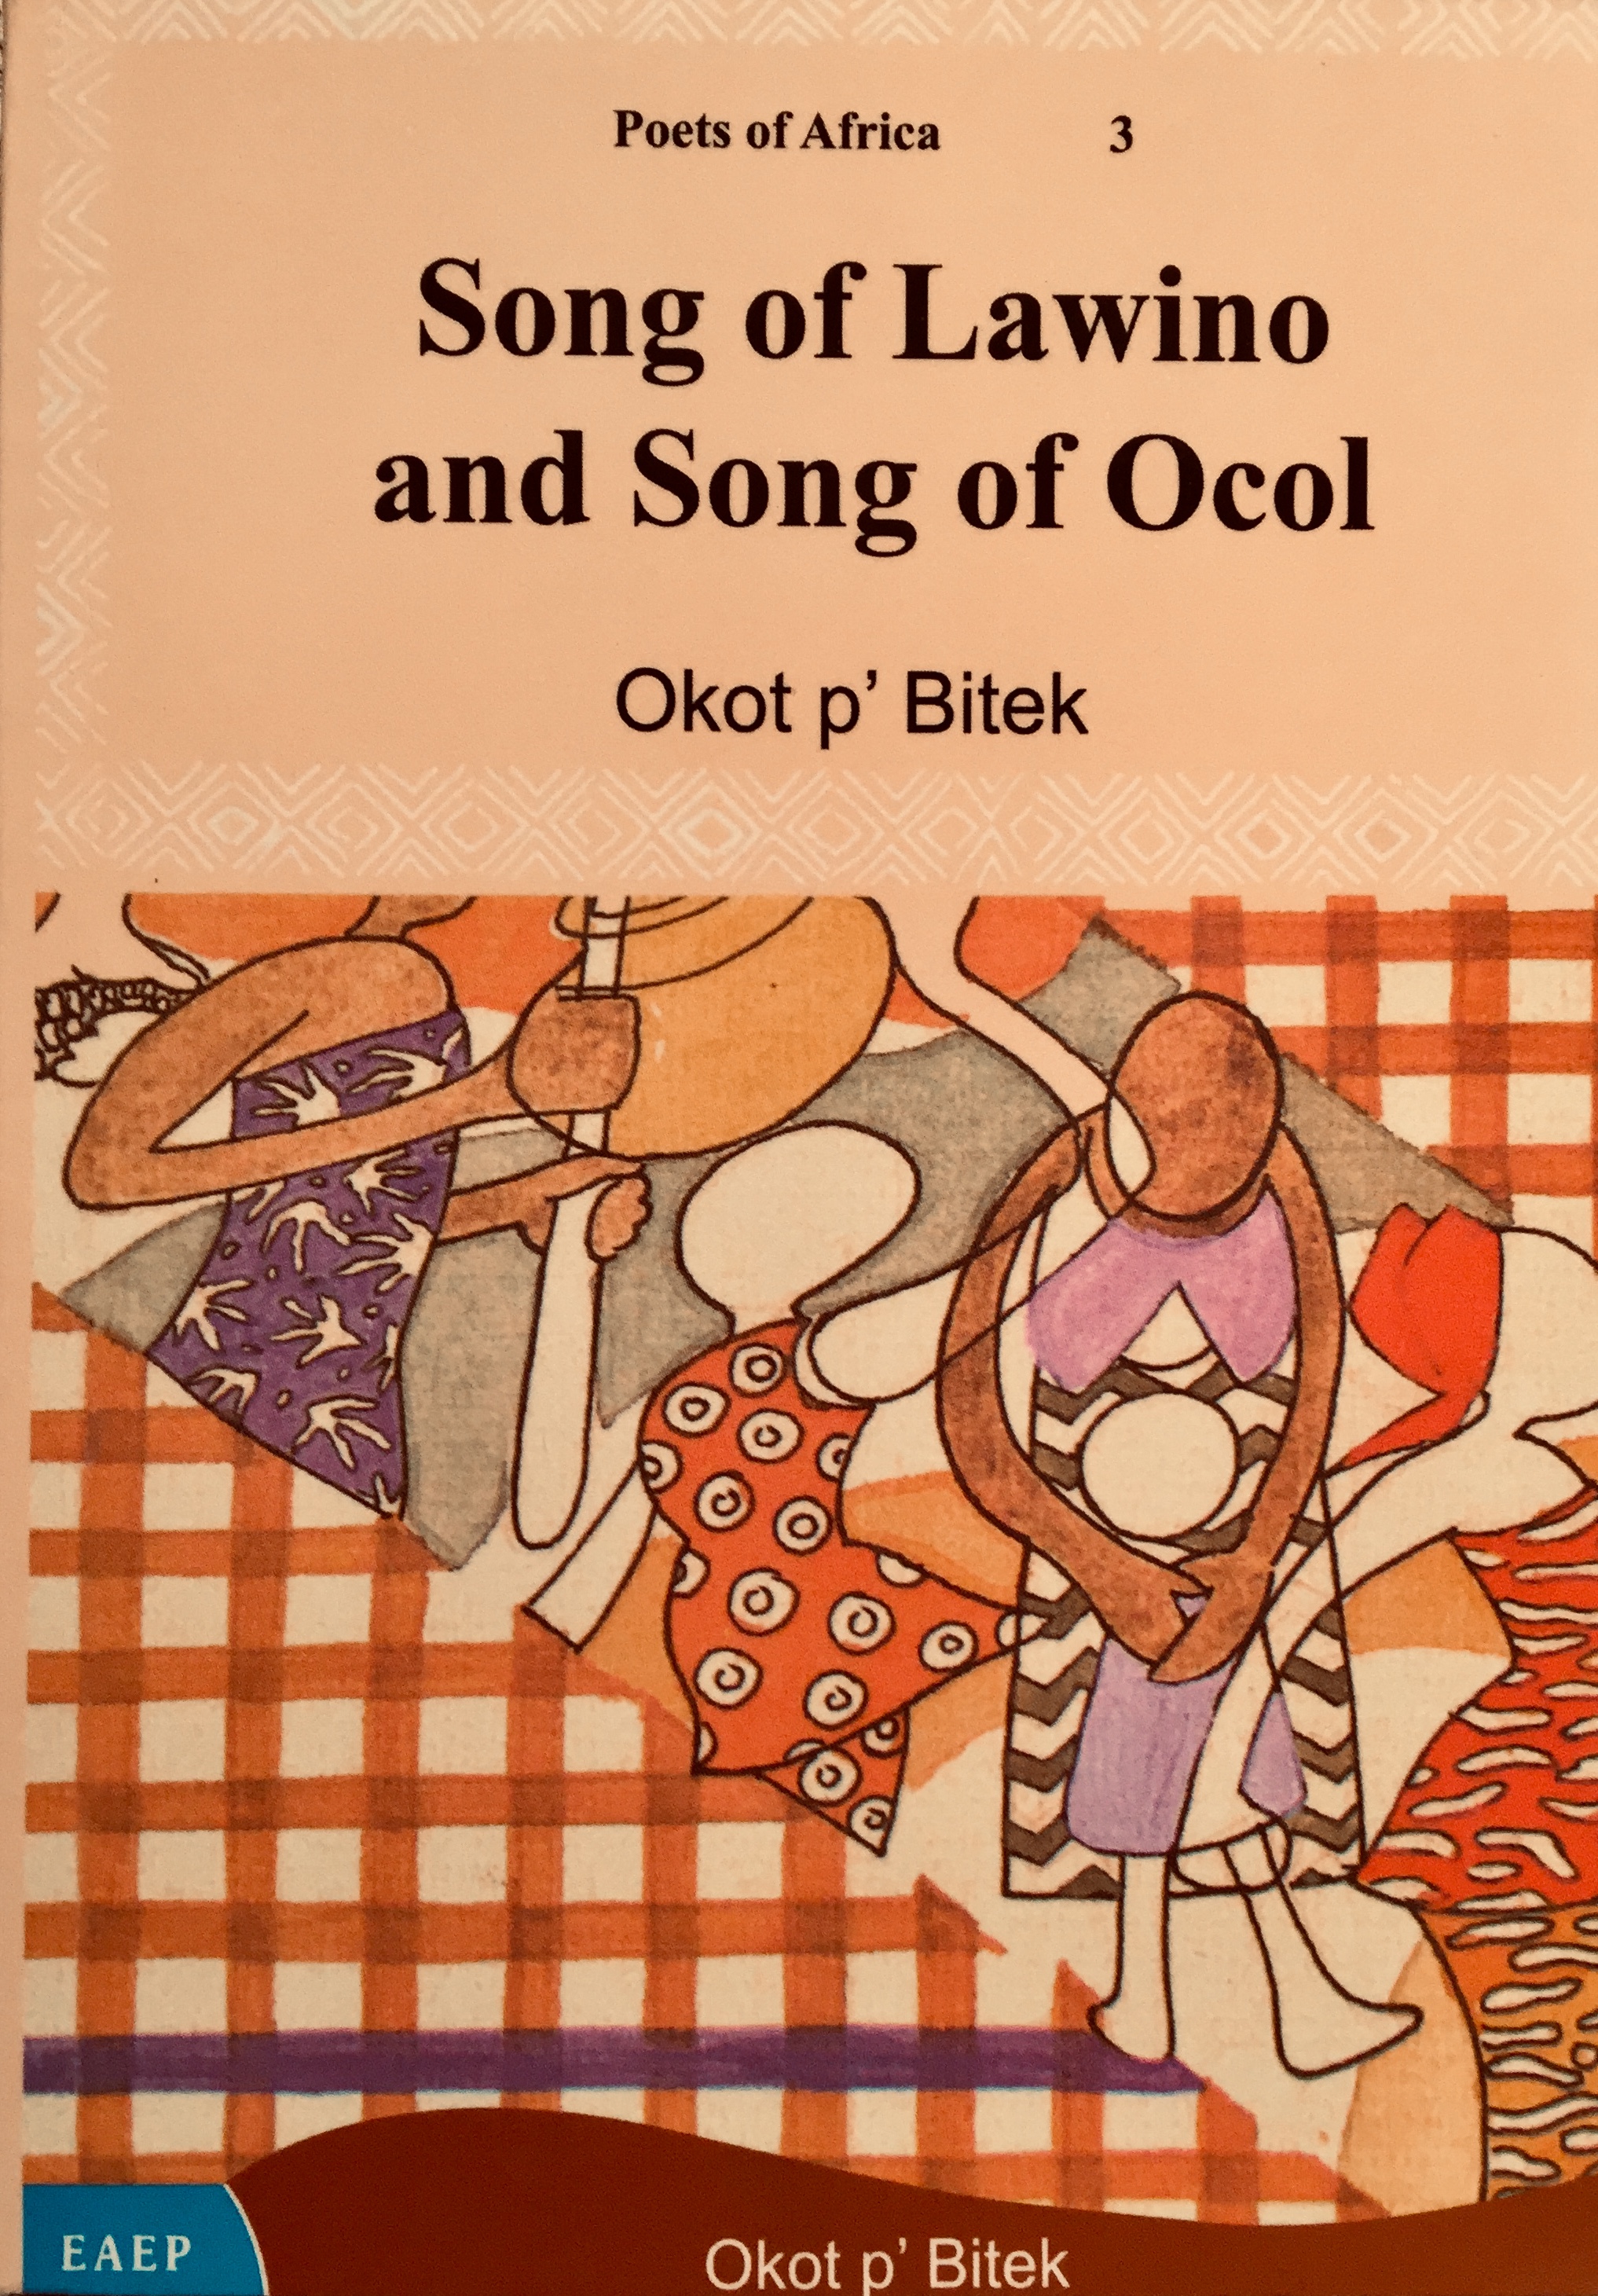 Song of Lawino and Song of Ocol - by Okot pBitek